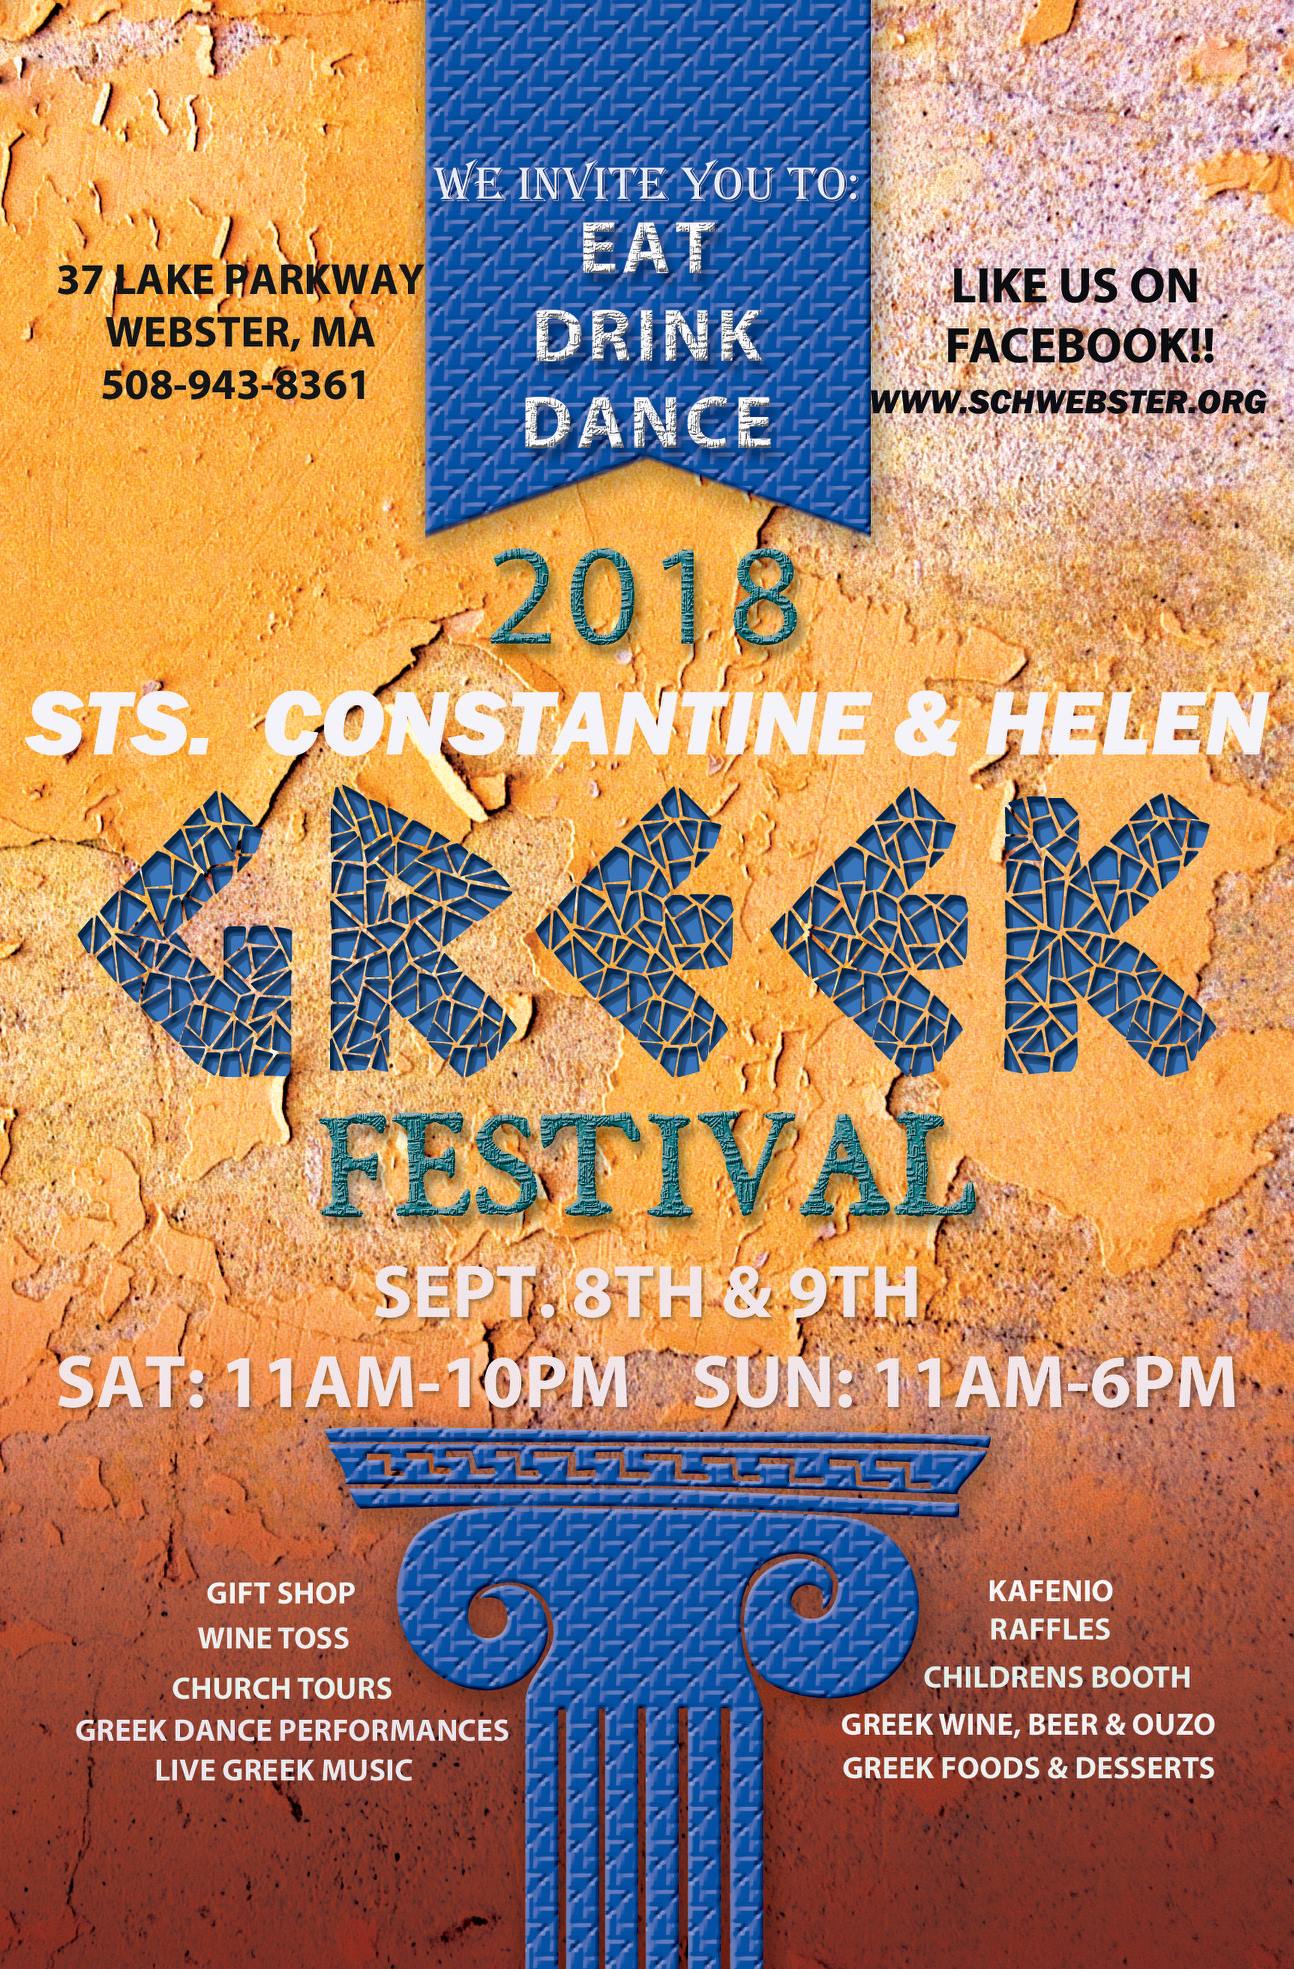 Webster MA Greek Festival at Saints Constantine and Helen Church